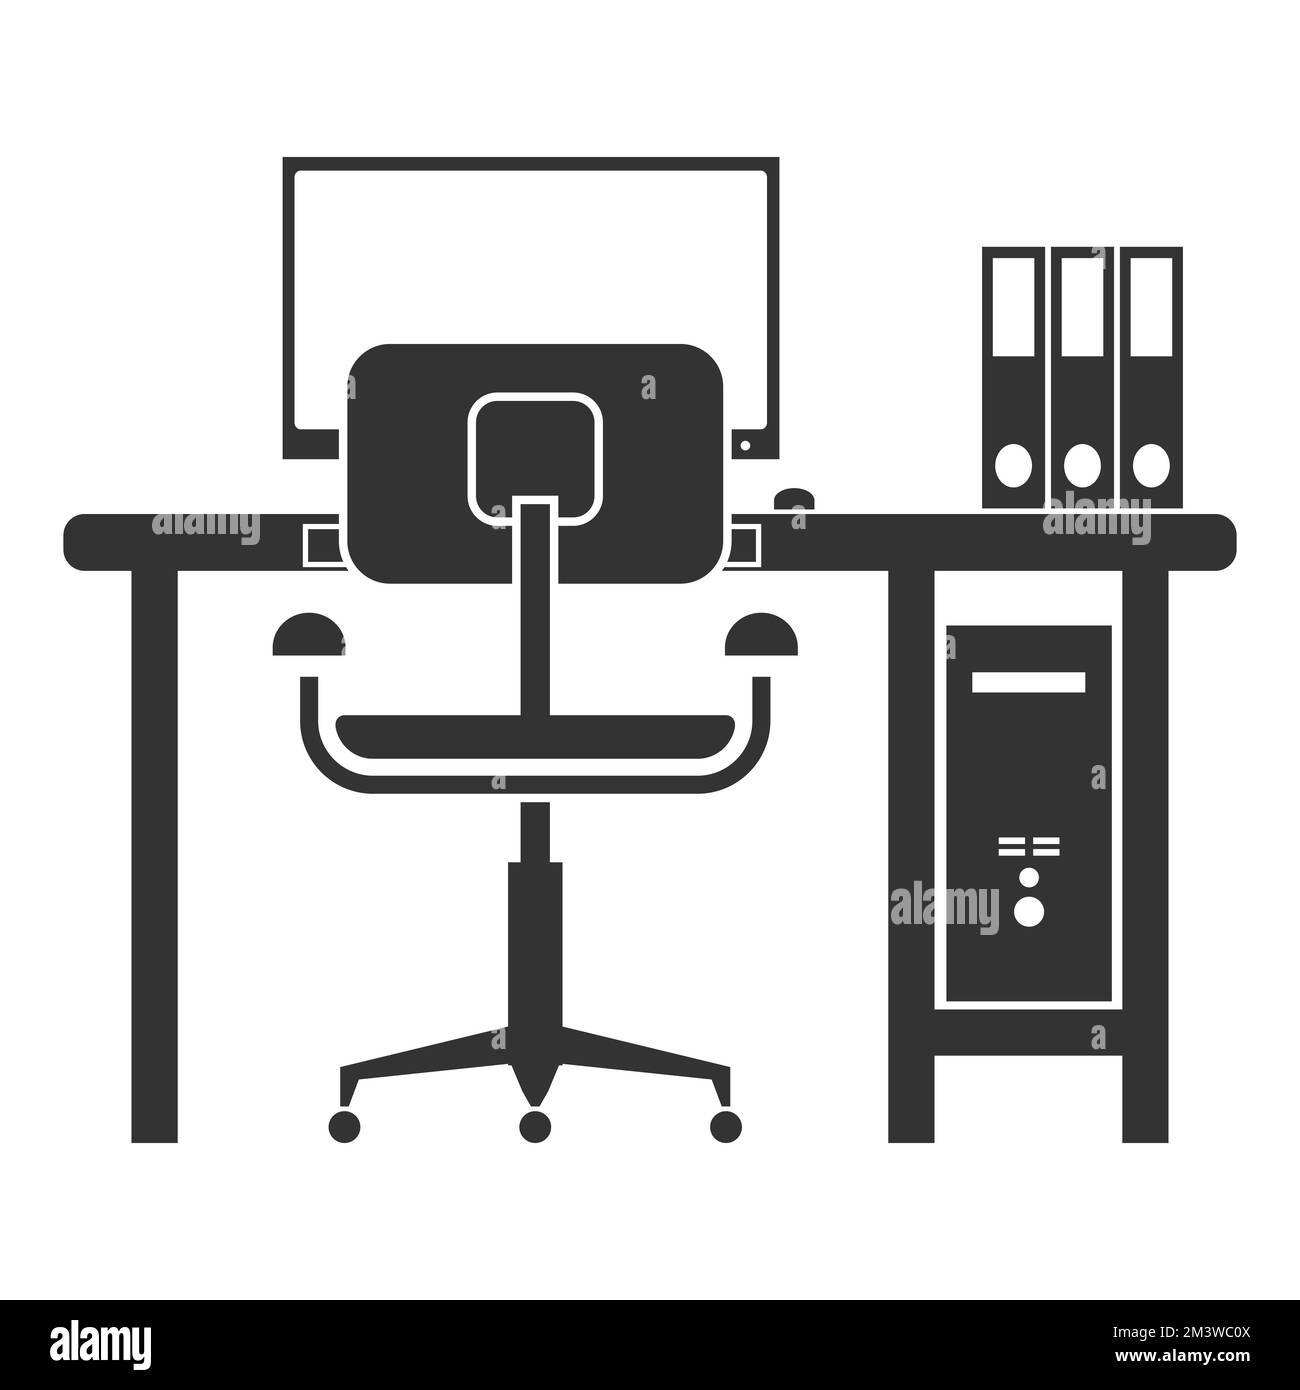 Interior of work desks, computer, files, chair image graphic icon logo design abstract concept vector stock. used as a symbol related to interior Stock Vector